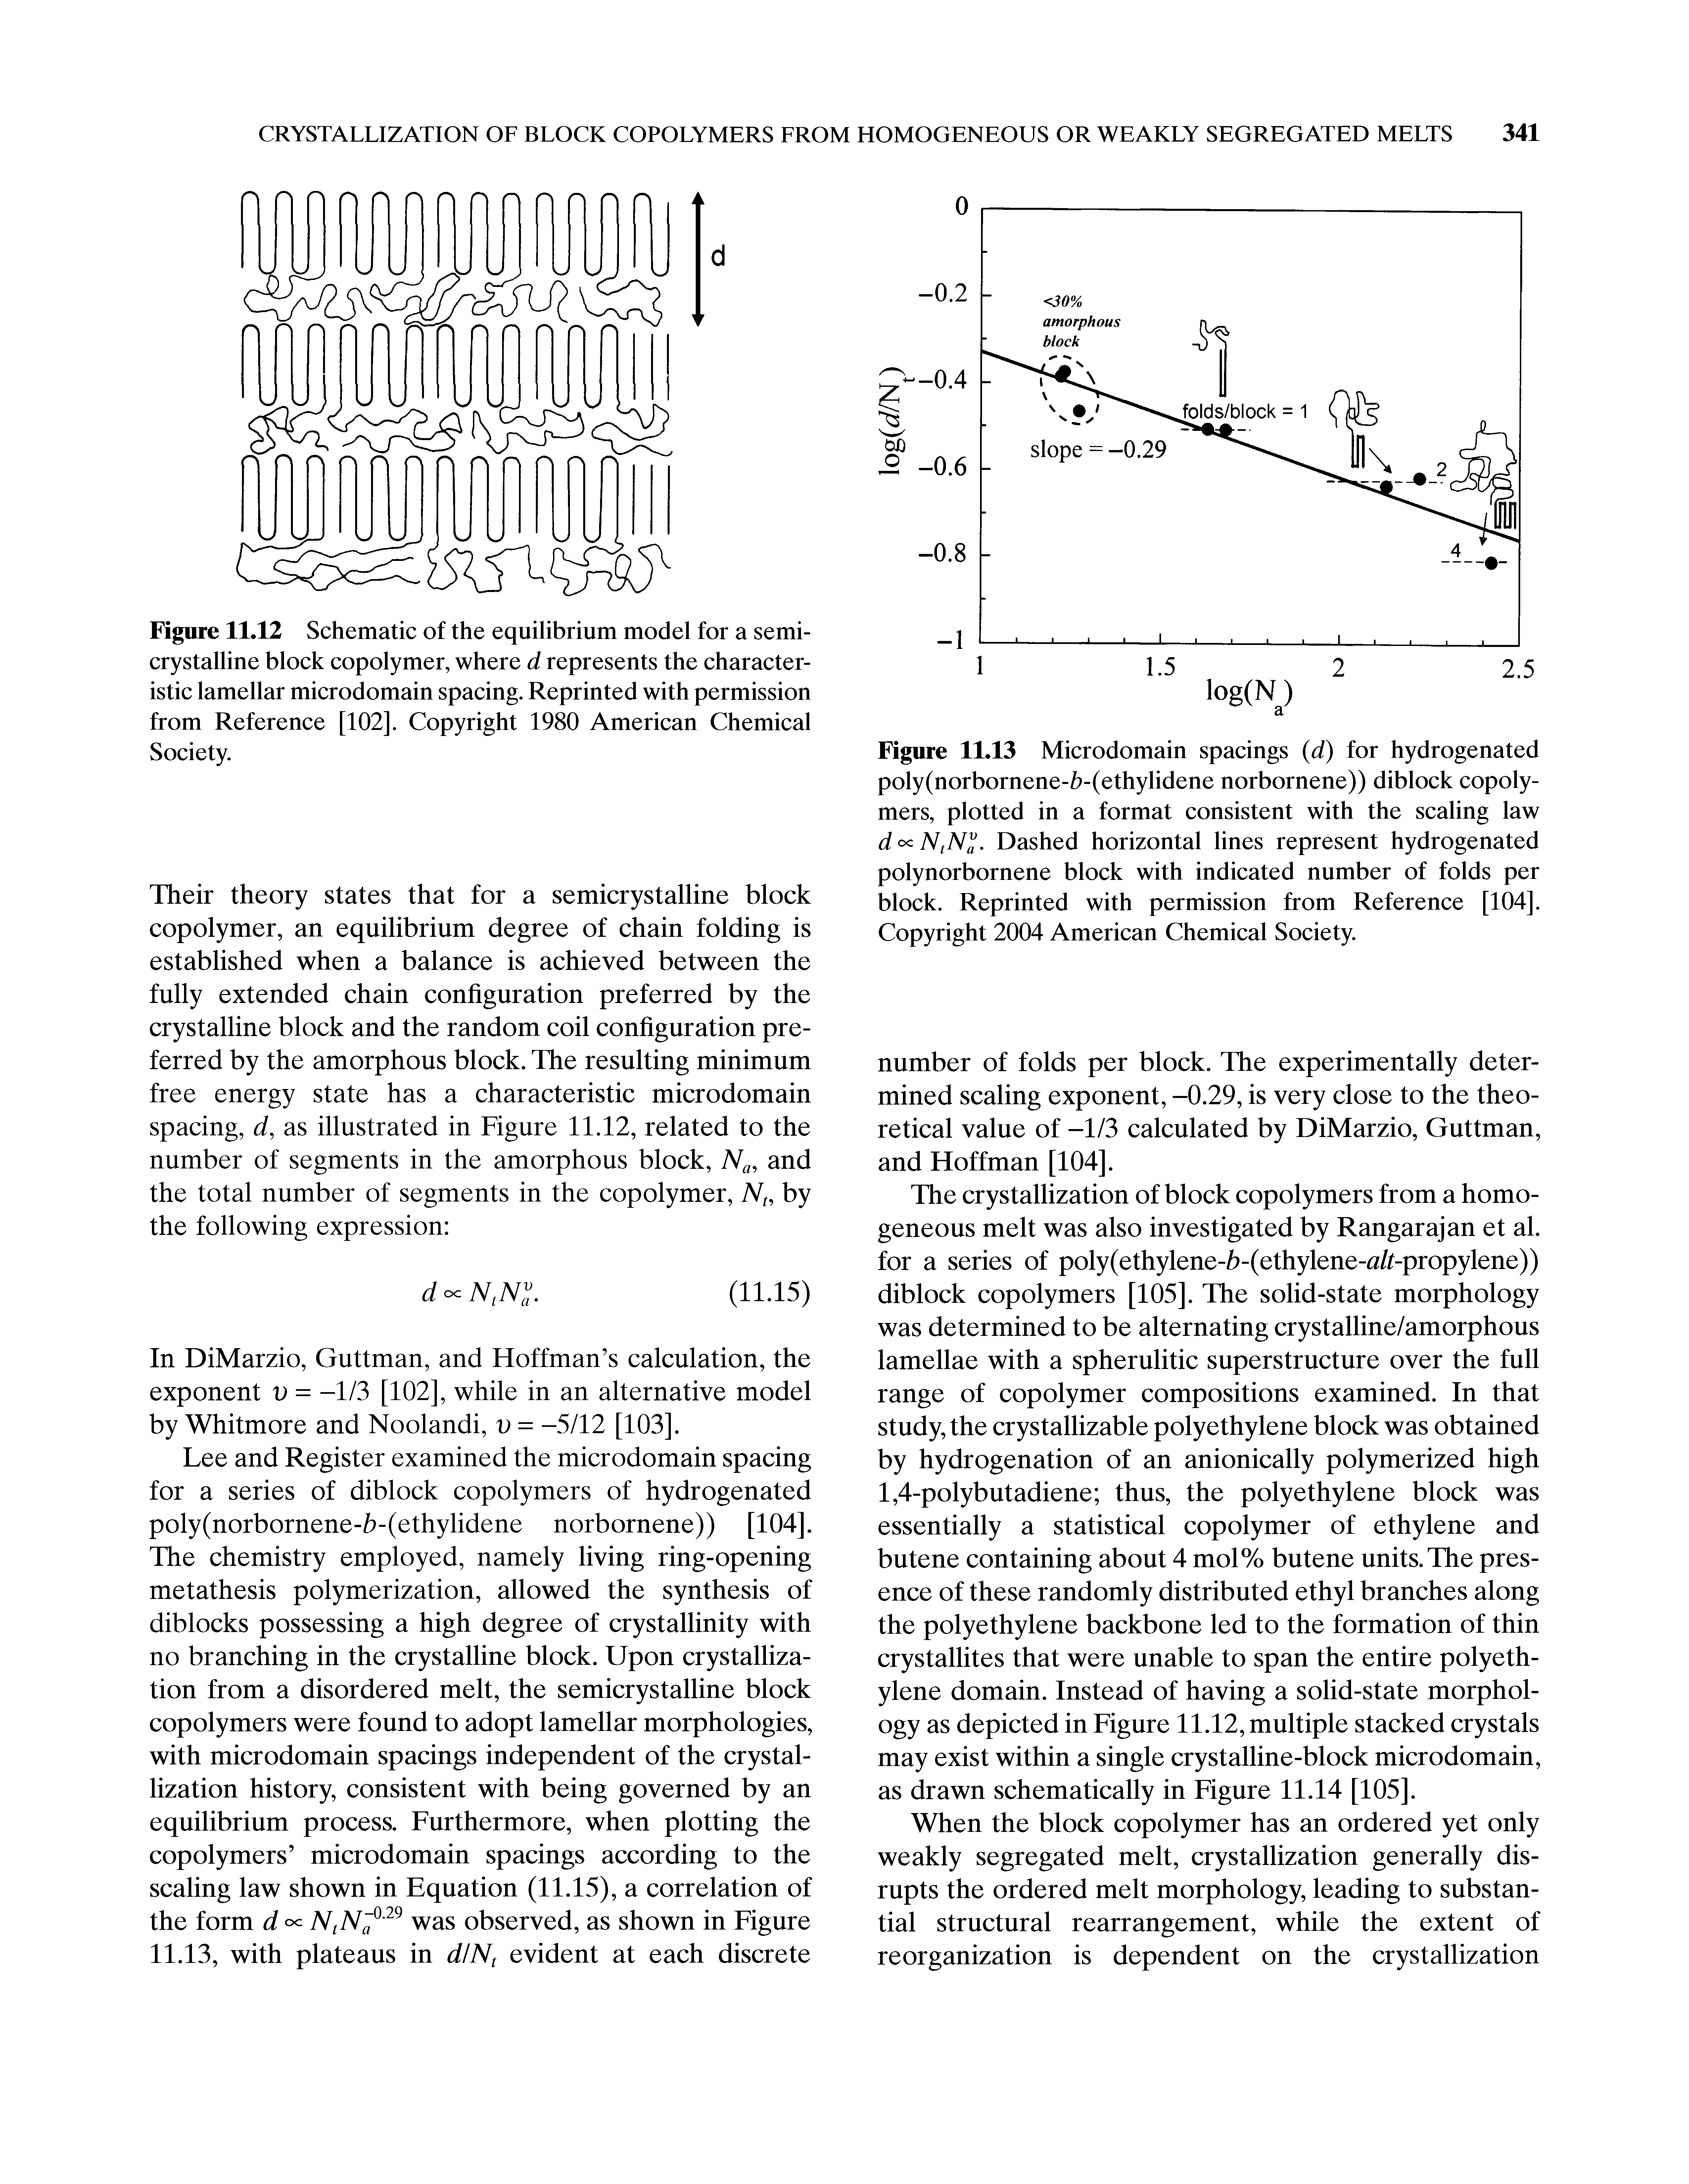 Figure 11.12 Schematic of the equilibrium model for a semicrystalline block copolymer, where d represents the characteristic lamellar microdomain spacing. Reprinted with permission from Reference [102]. Copyright 1980 American Chemical Society.